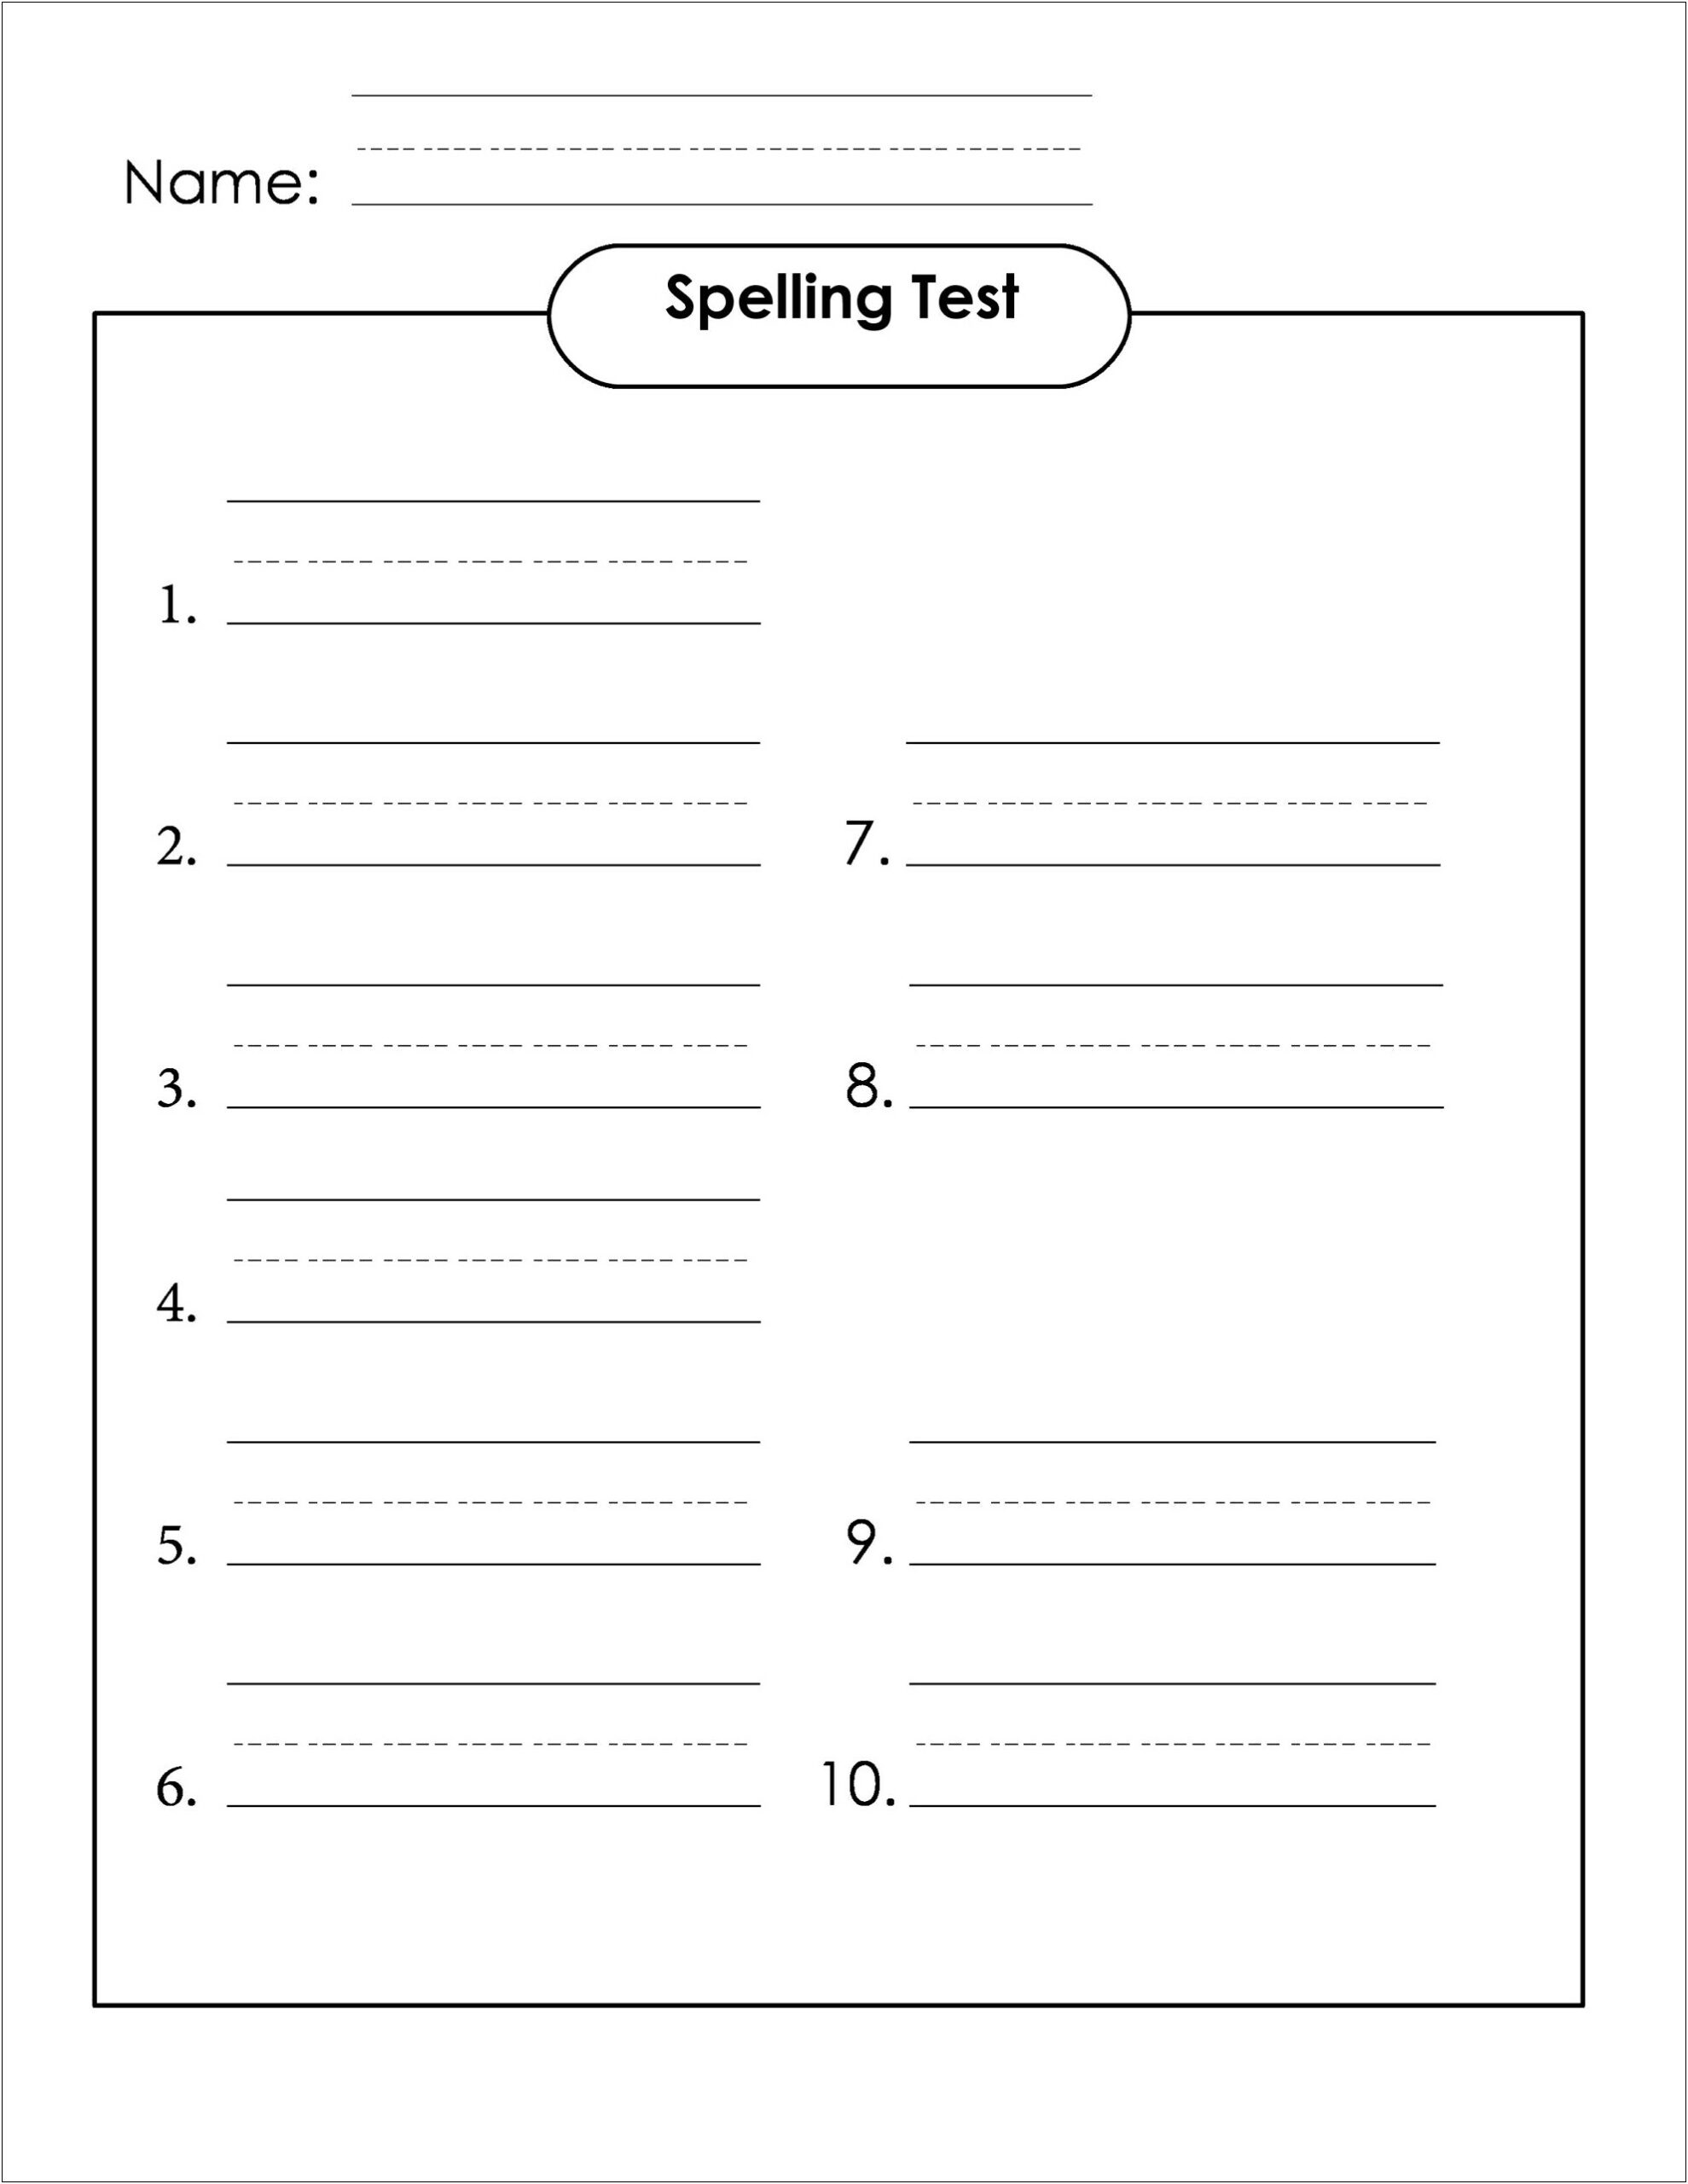 Free Spelling Test Templates With Dictation Sentence